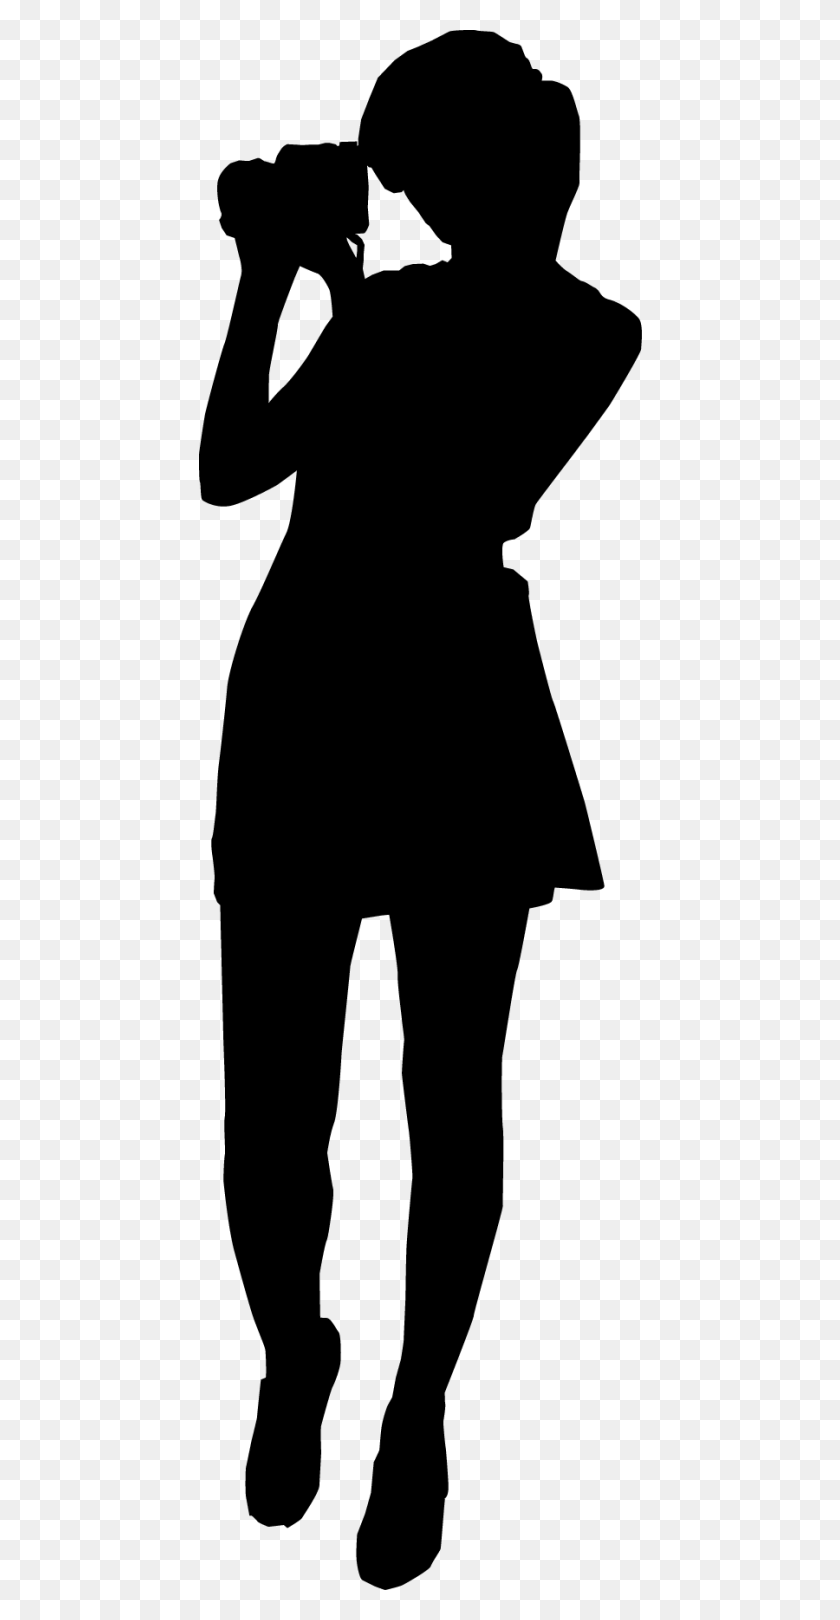 900x1800 Pics For Gt Girl Photographer Silhouette Silhouette Silhouette - People PNG Silhouette